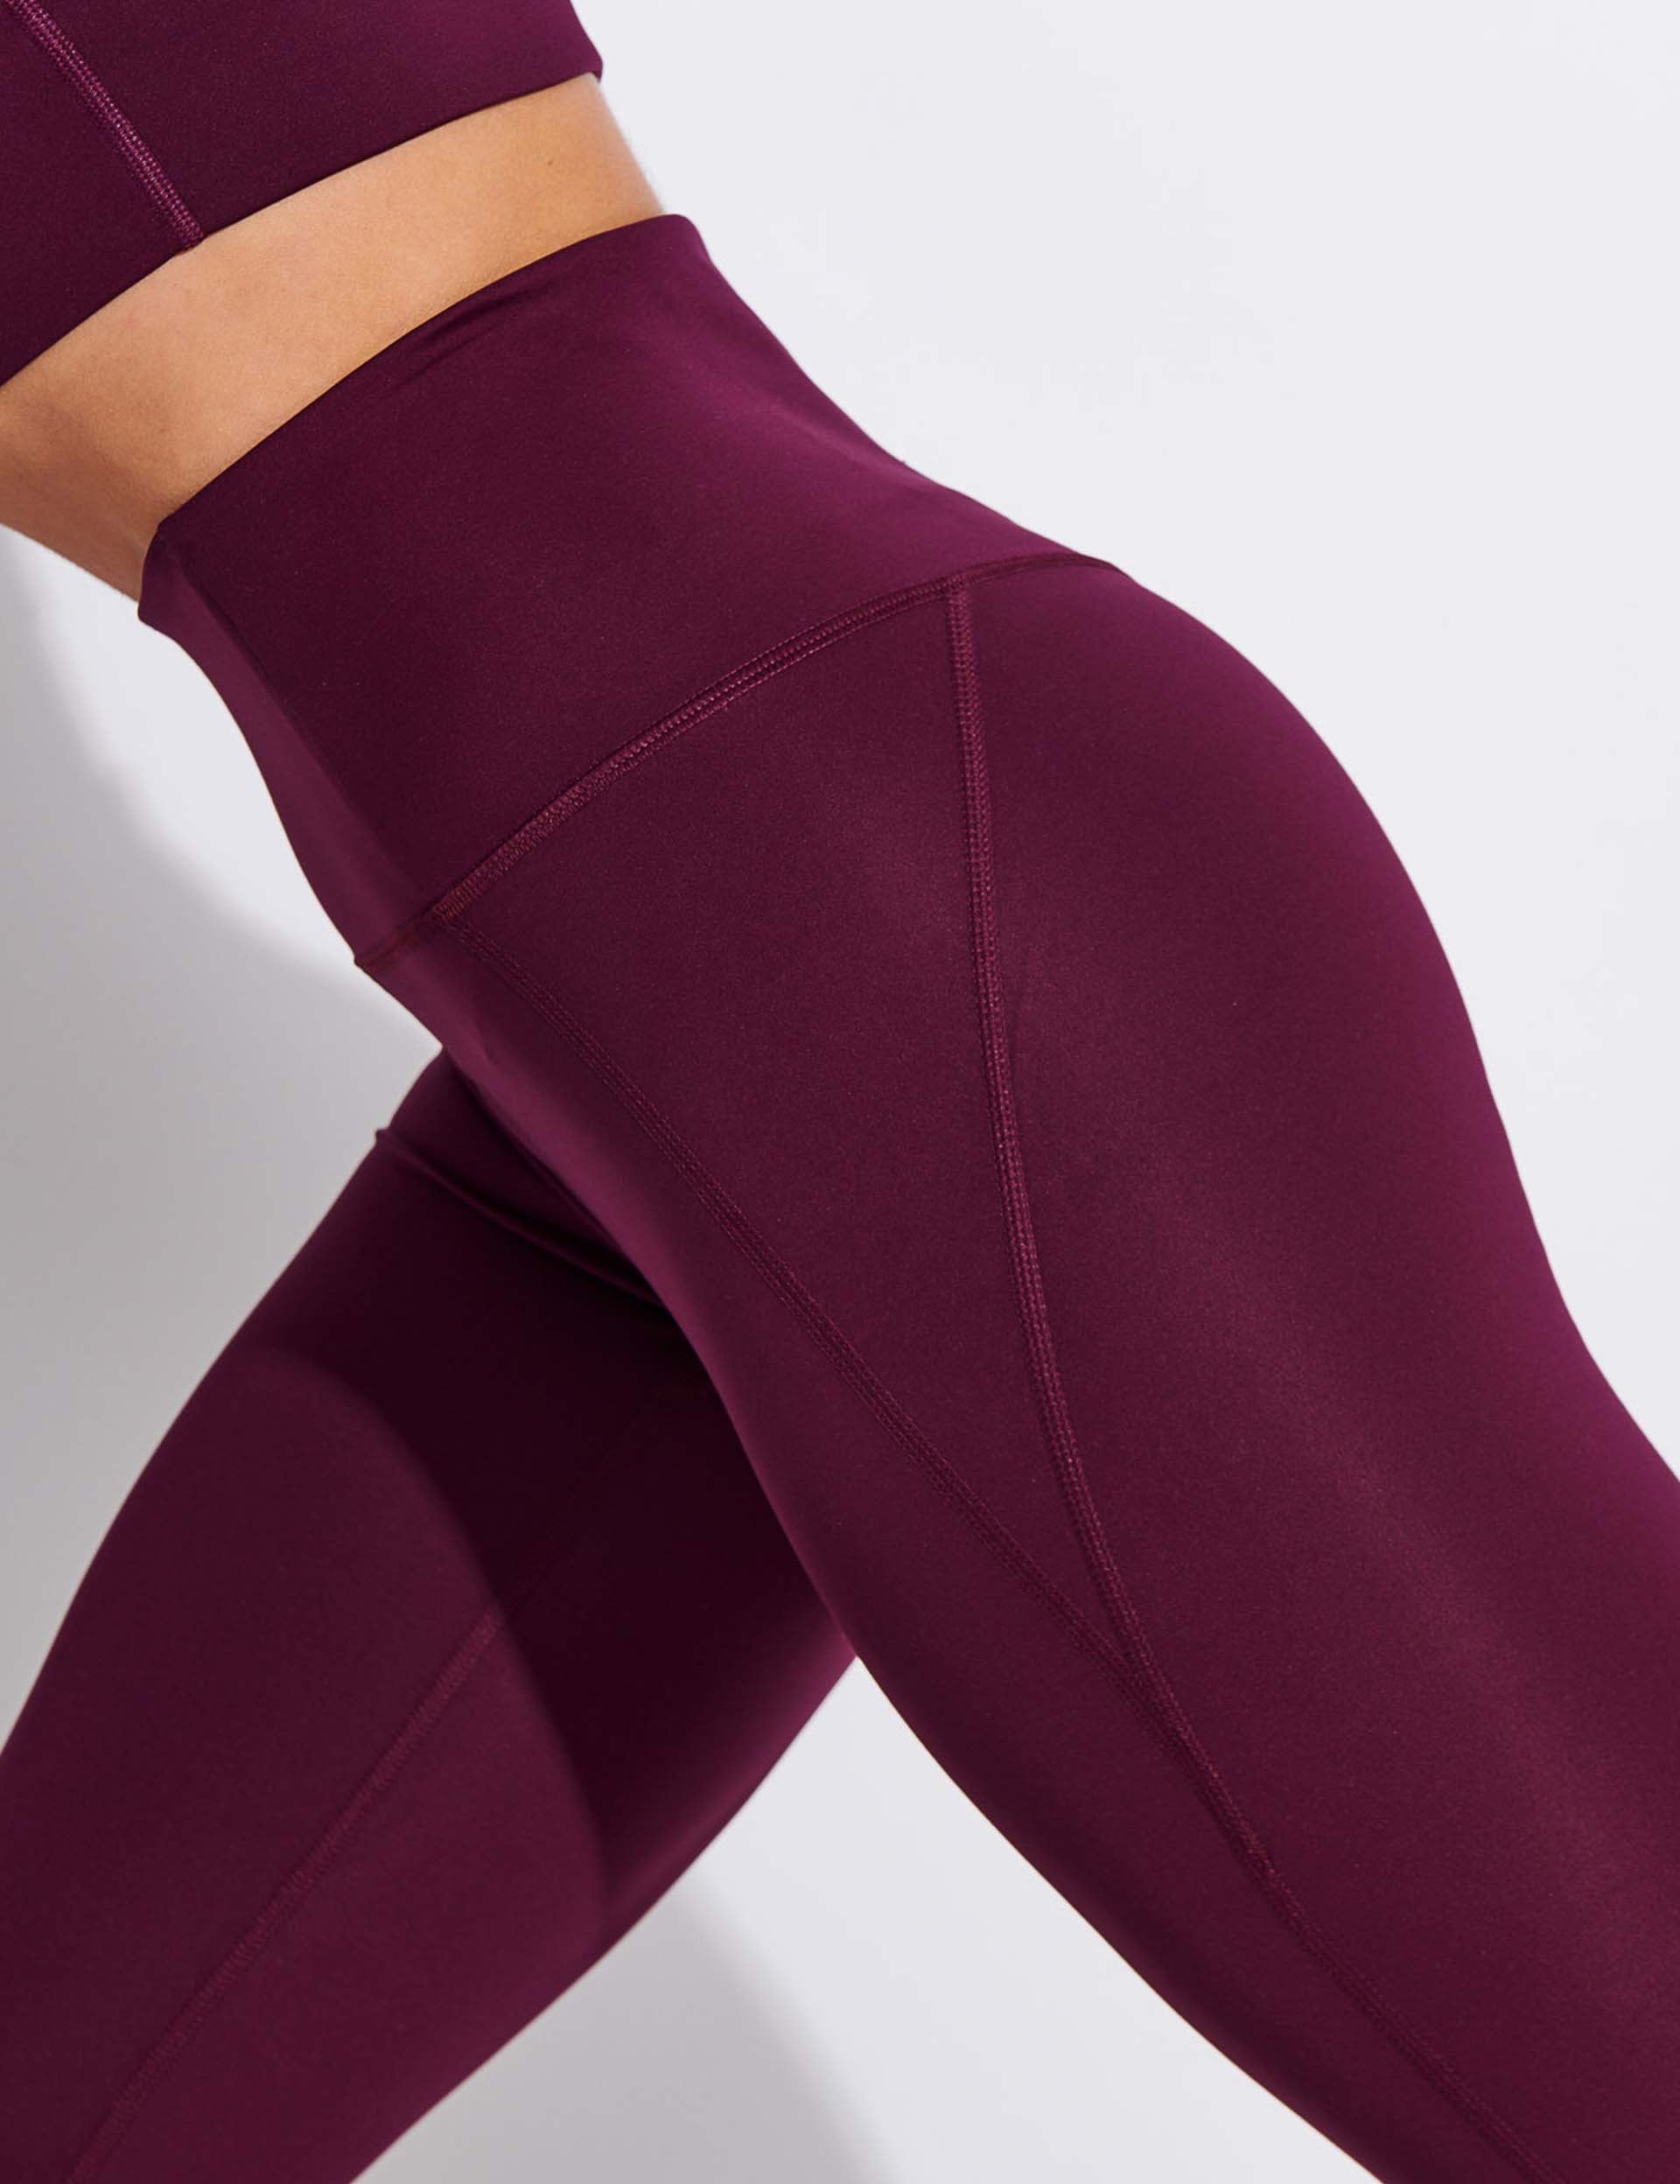 Girlfriend Collective Compressive High-Rise Leggings in Plum 28.5” Length